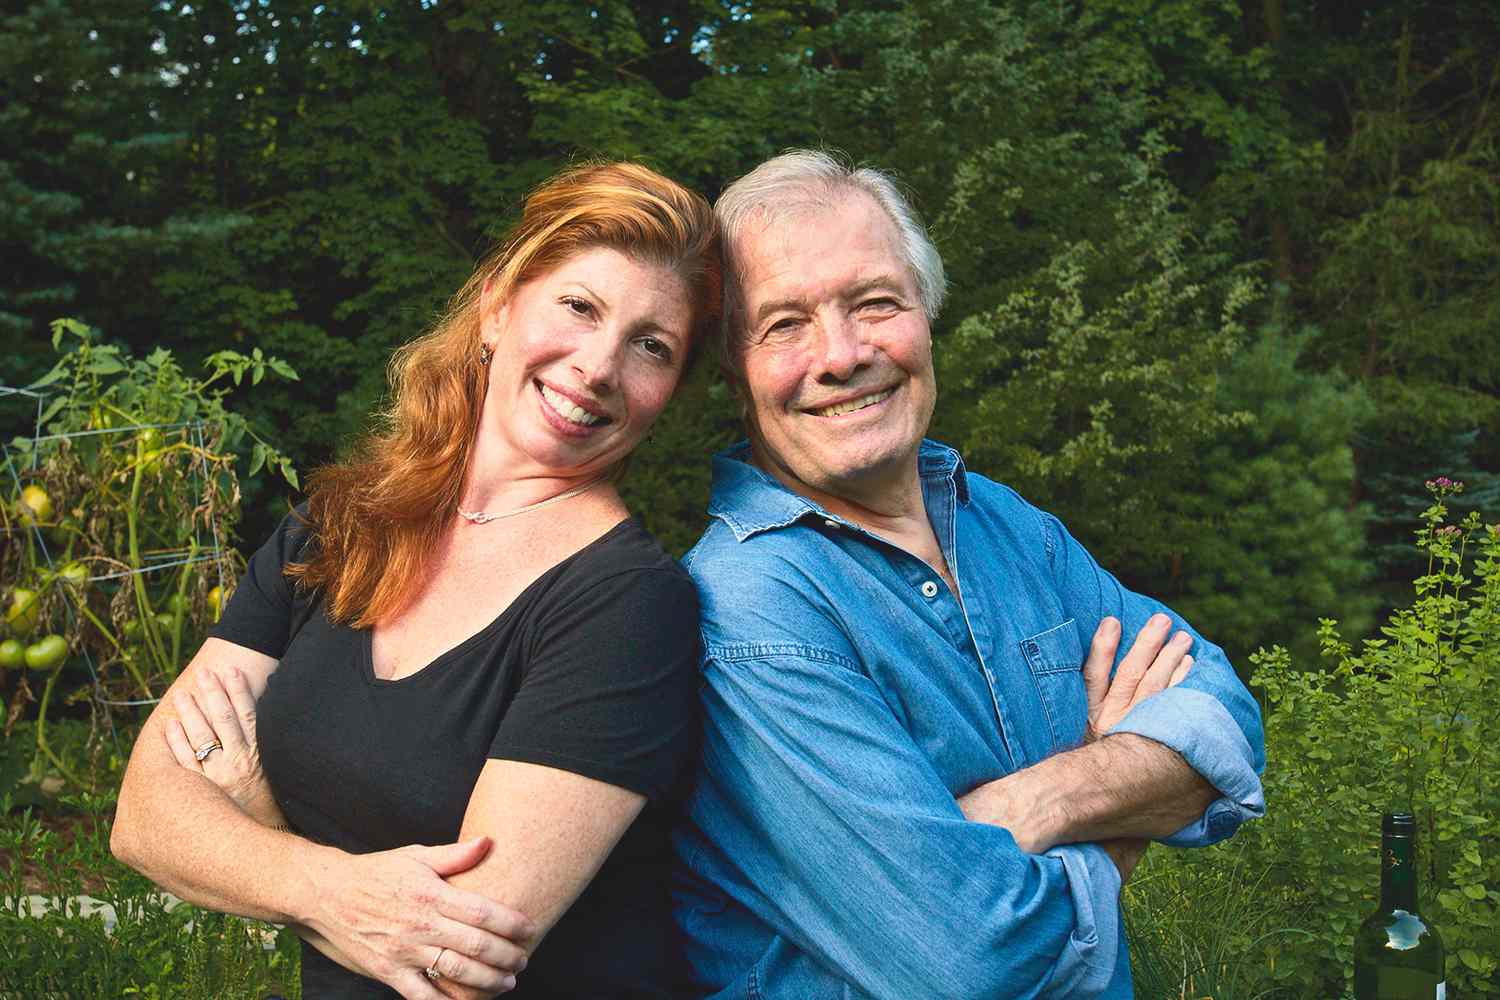 Is Jacques Pepin's Daughter A TV Presenter? Claudine Pépin - Her Career Details Explored